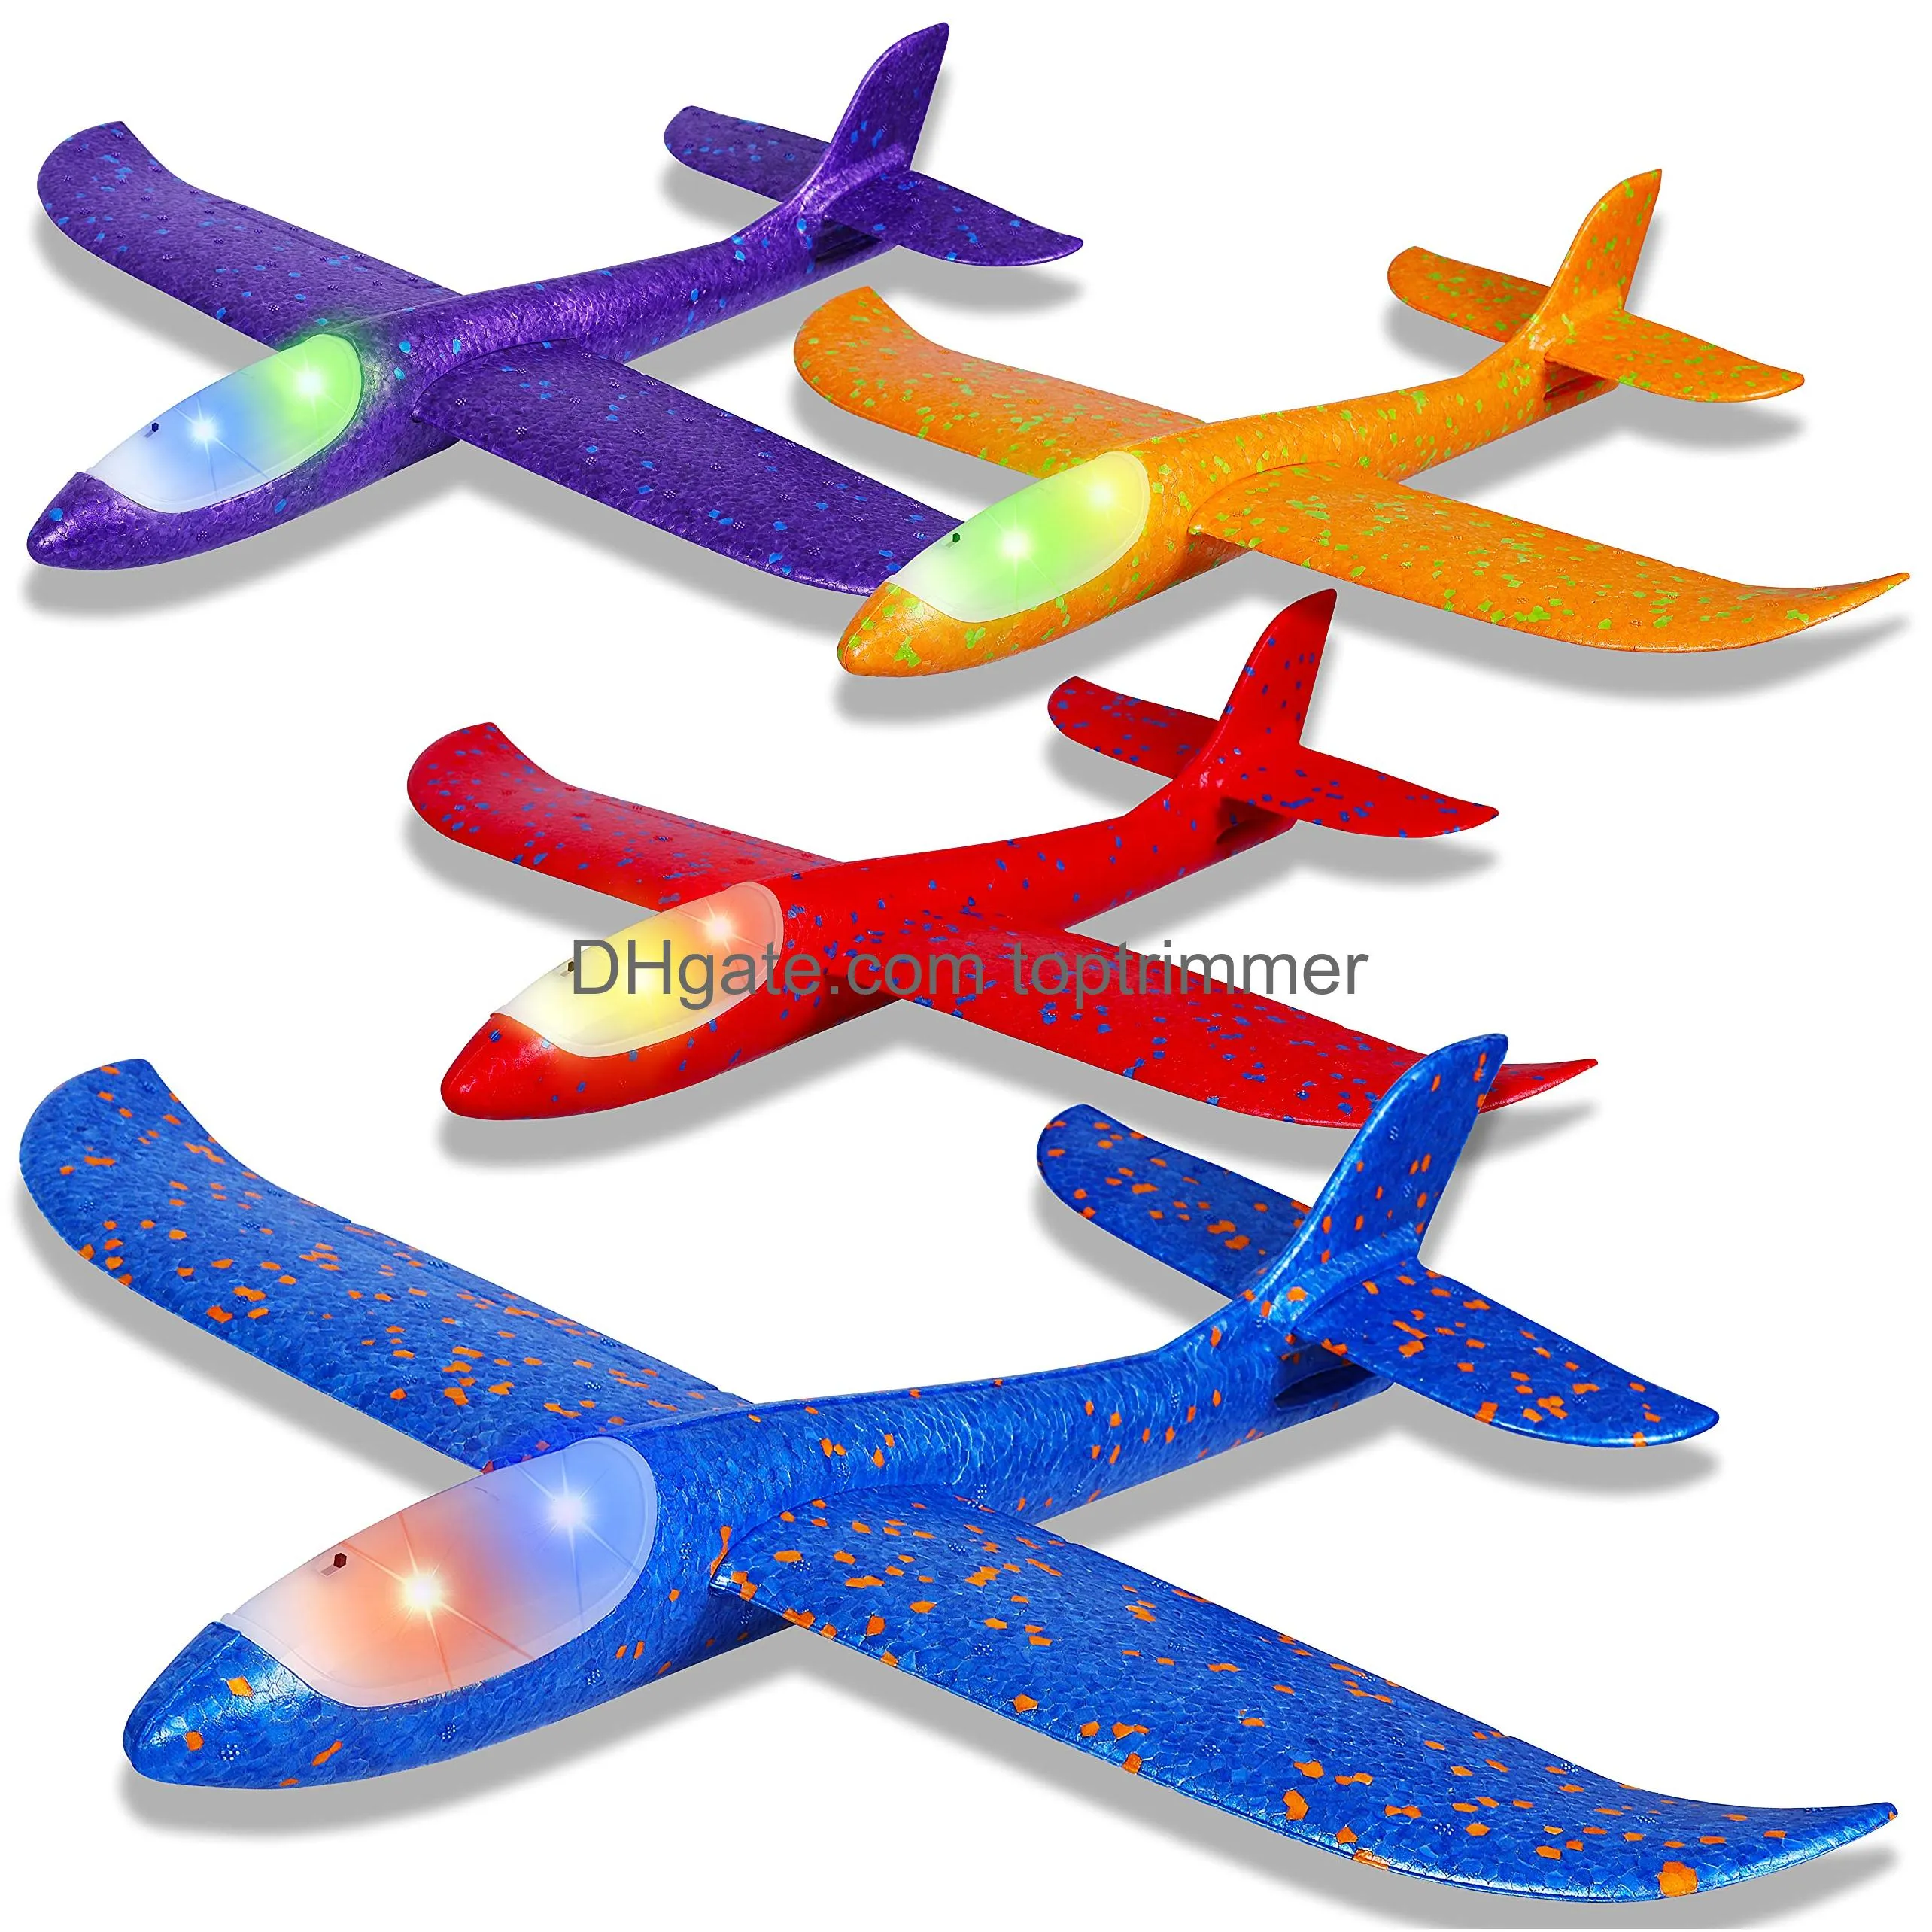 ijo led light airplane toys17.5 large throwing foam plane2 flight modes glider planeoutdoor flying toys for kidsflying toys gift for boys girls 3 4 5 6 7 8 9 years old